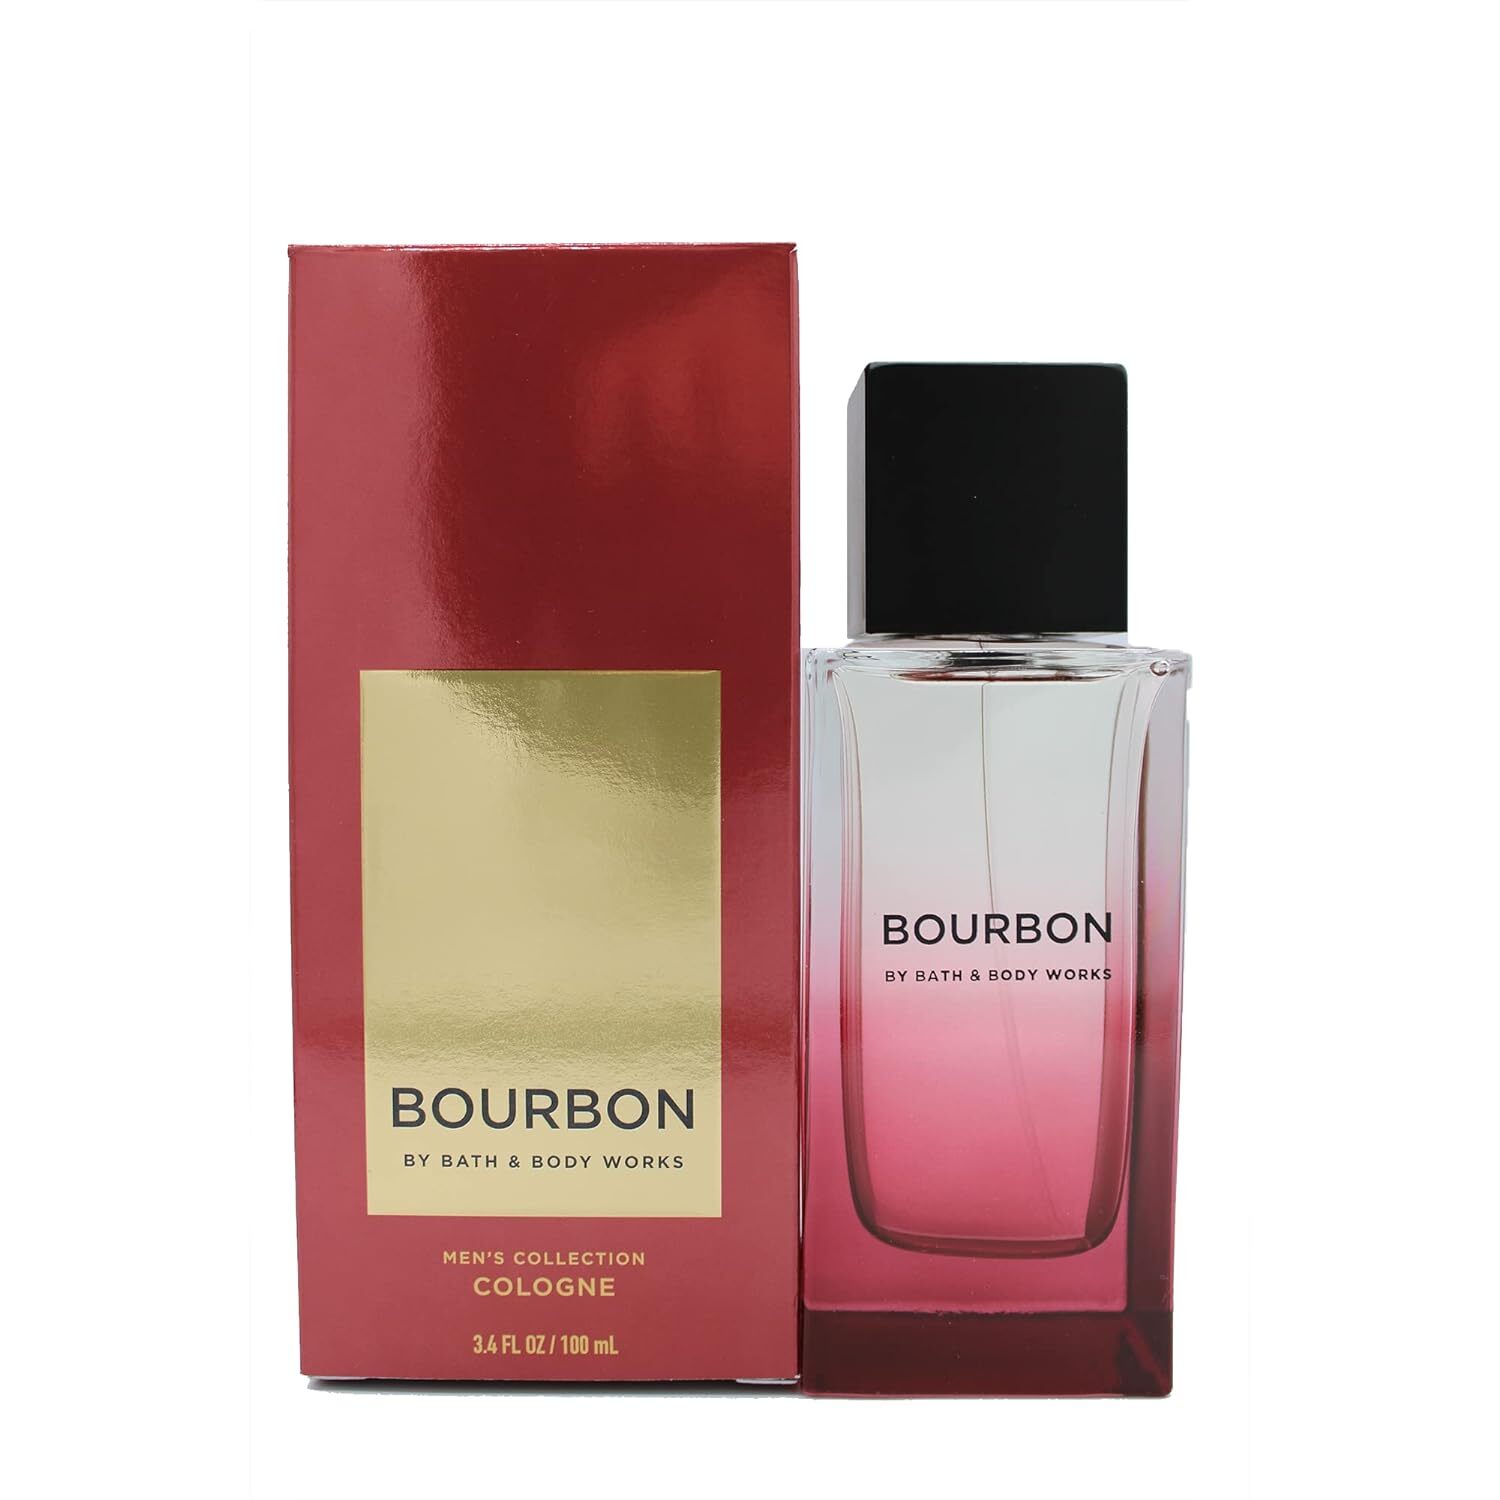 BBW - Bath and Body - Bourbon Men's Collection Cologne 3.4fl oz / 180ml (Pack of 1)